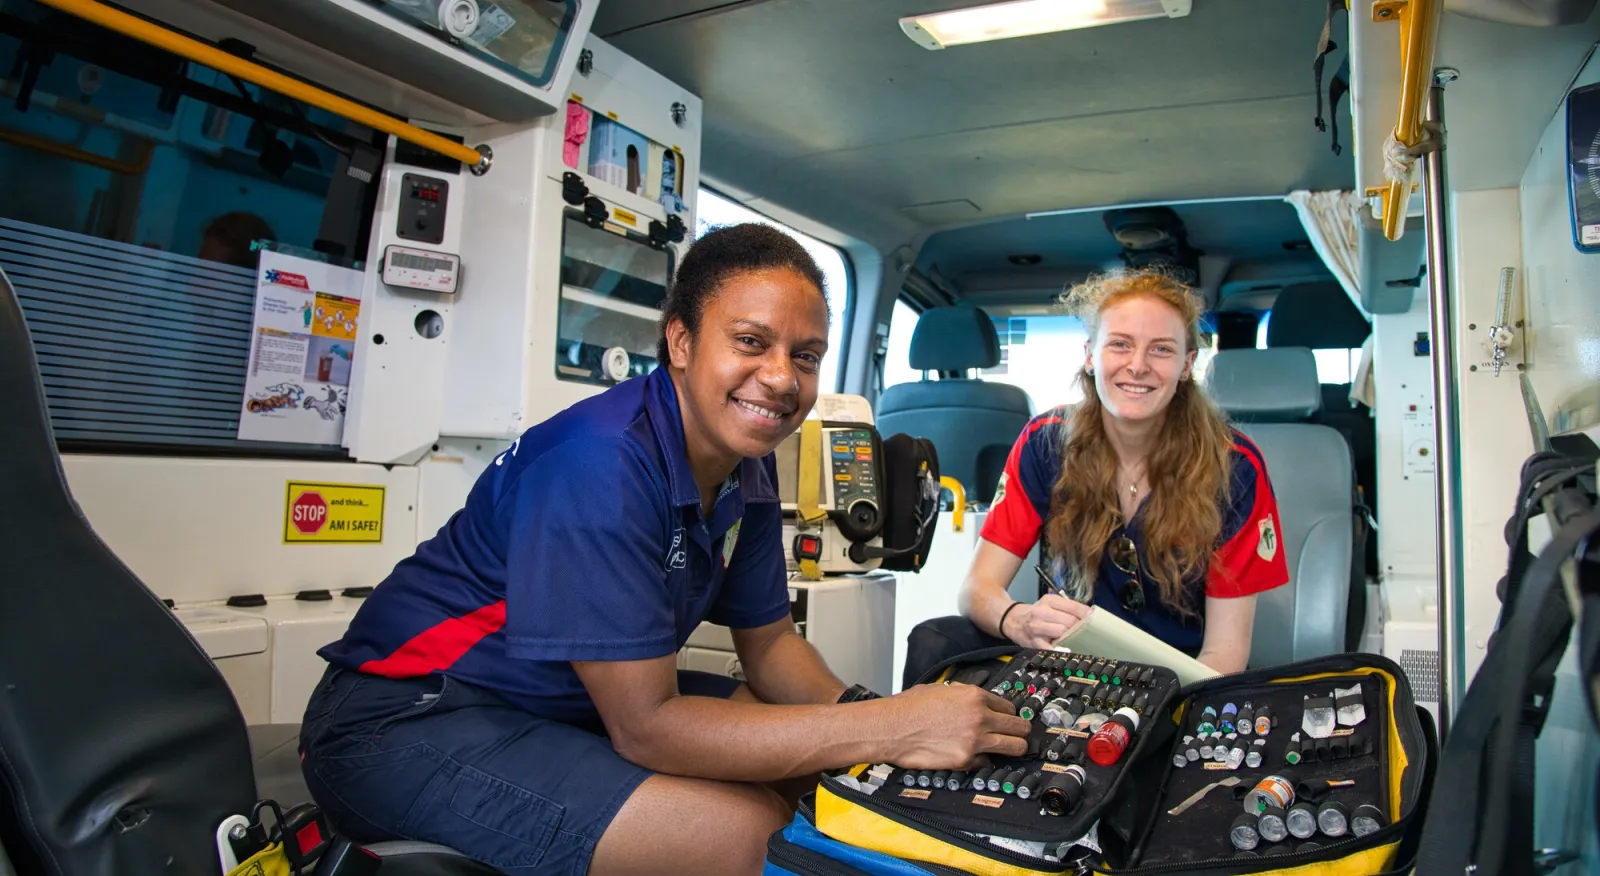 Two women sit in the back of an ambulance, they are paramedics wearing the uniform. They are smiling to the camera and a medic bag lays open between them.